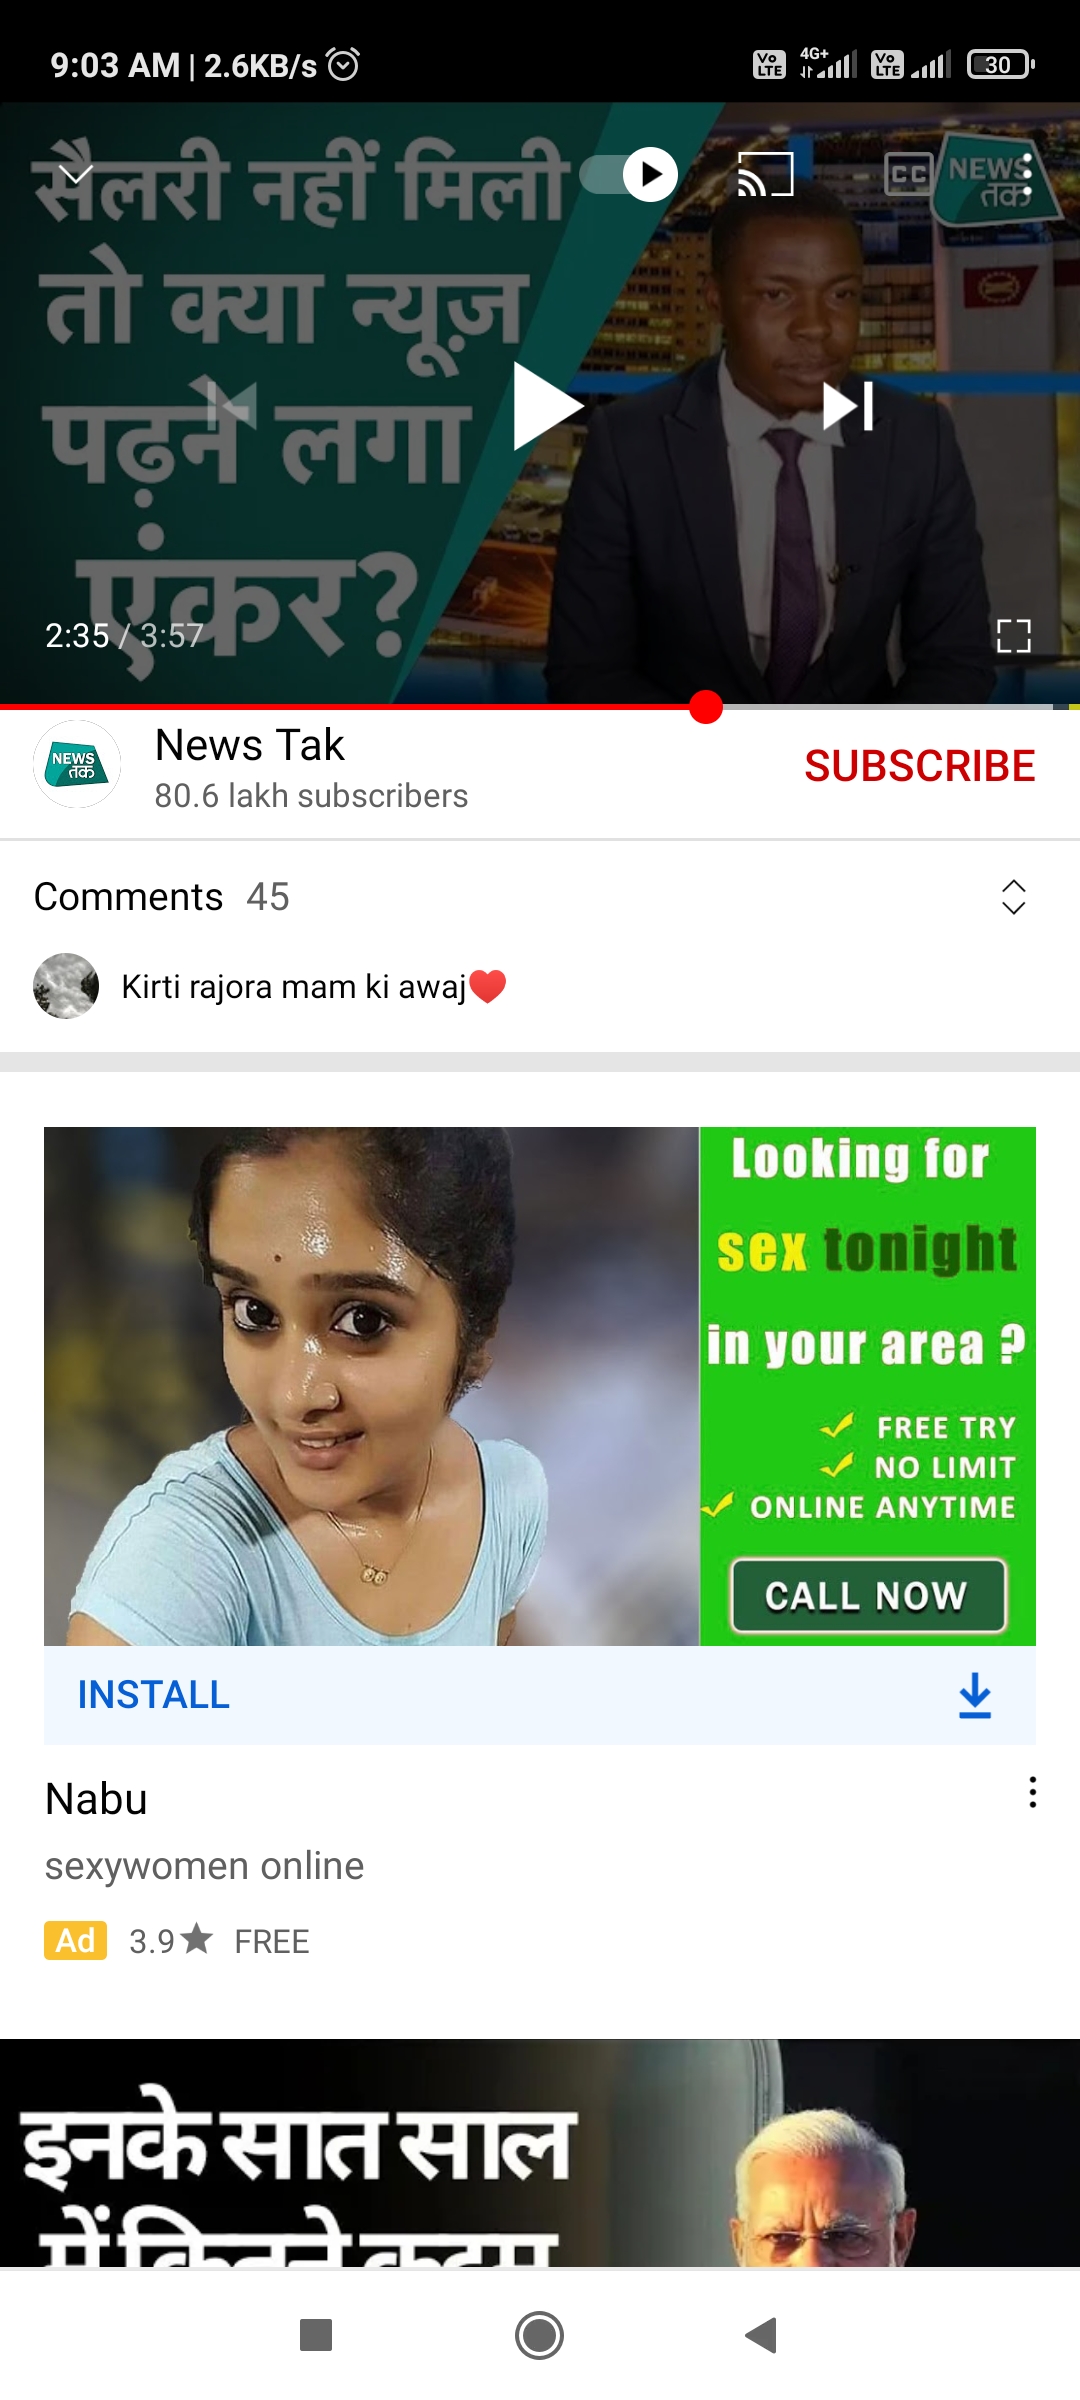 Porn Girls Youtube - In youtube ads is totally sex girls selling video ads , porn graphic , ads  showing totally feka - YouTube Community